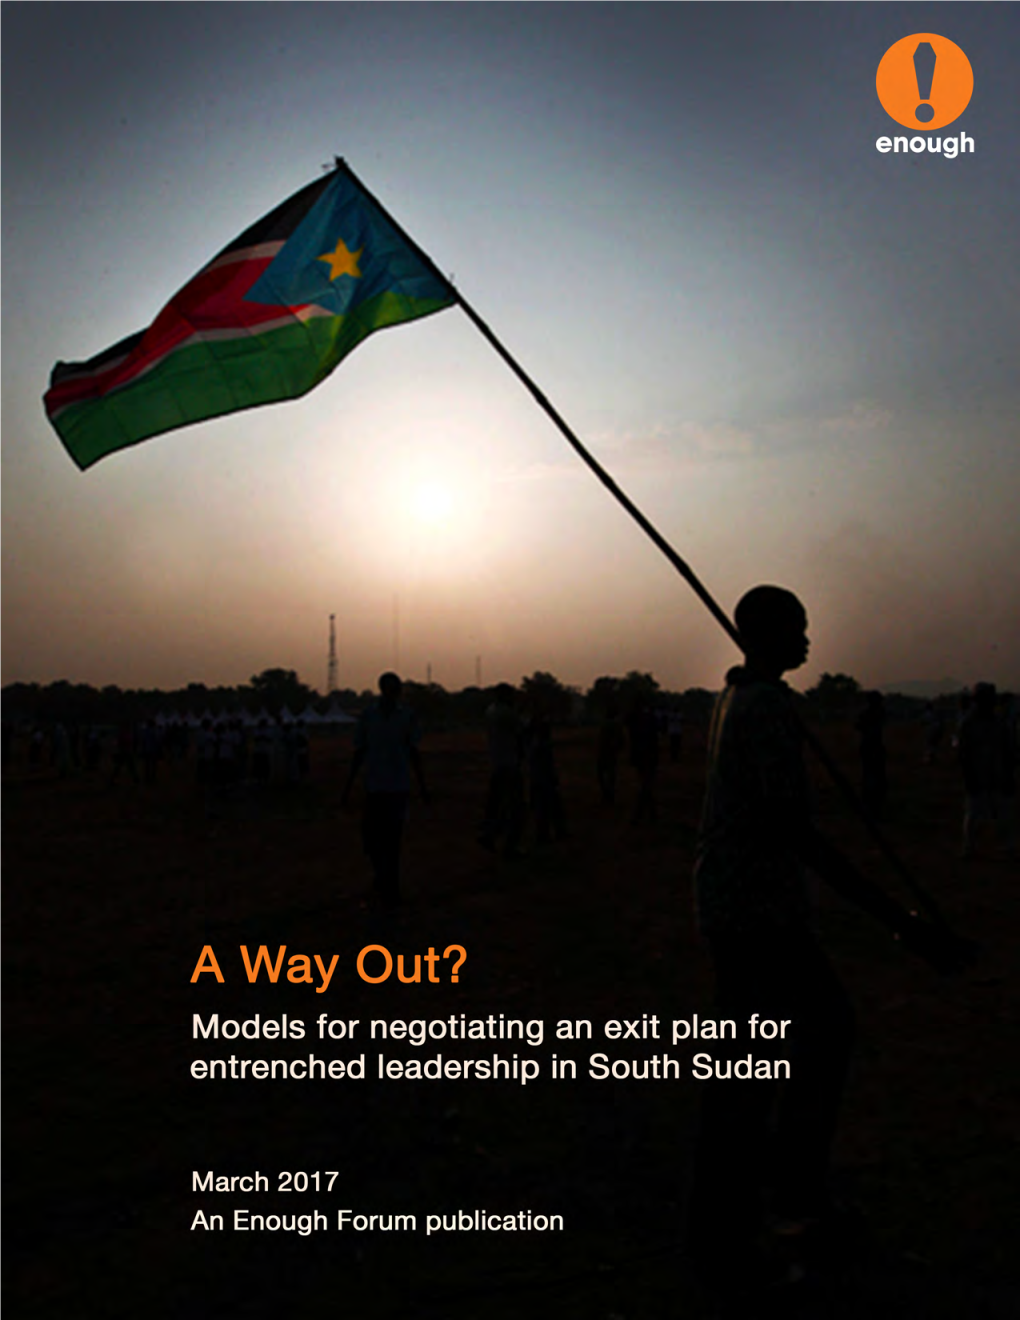 A Way Out? Models for Negotiating an Exit Plan for Entrenched Leadership in South Sudan